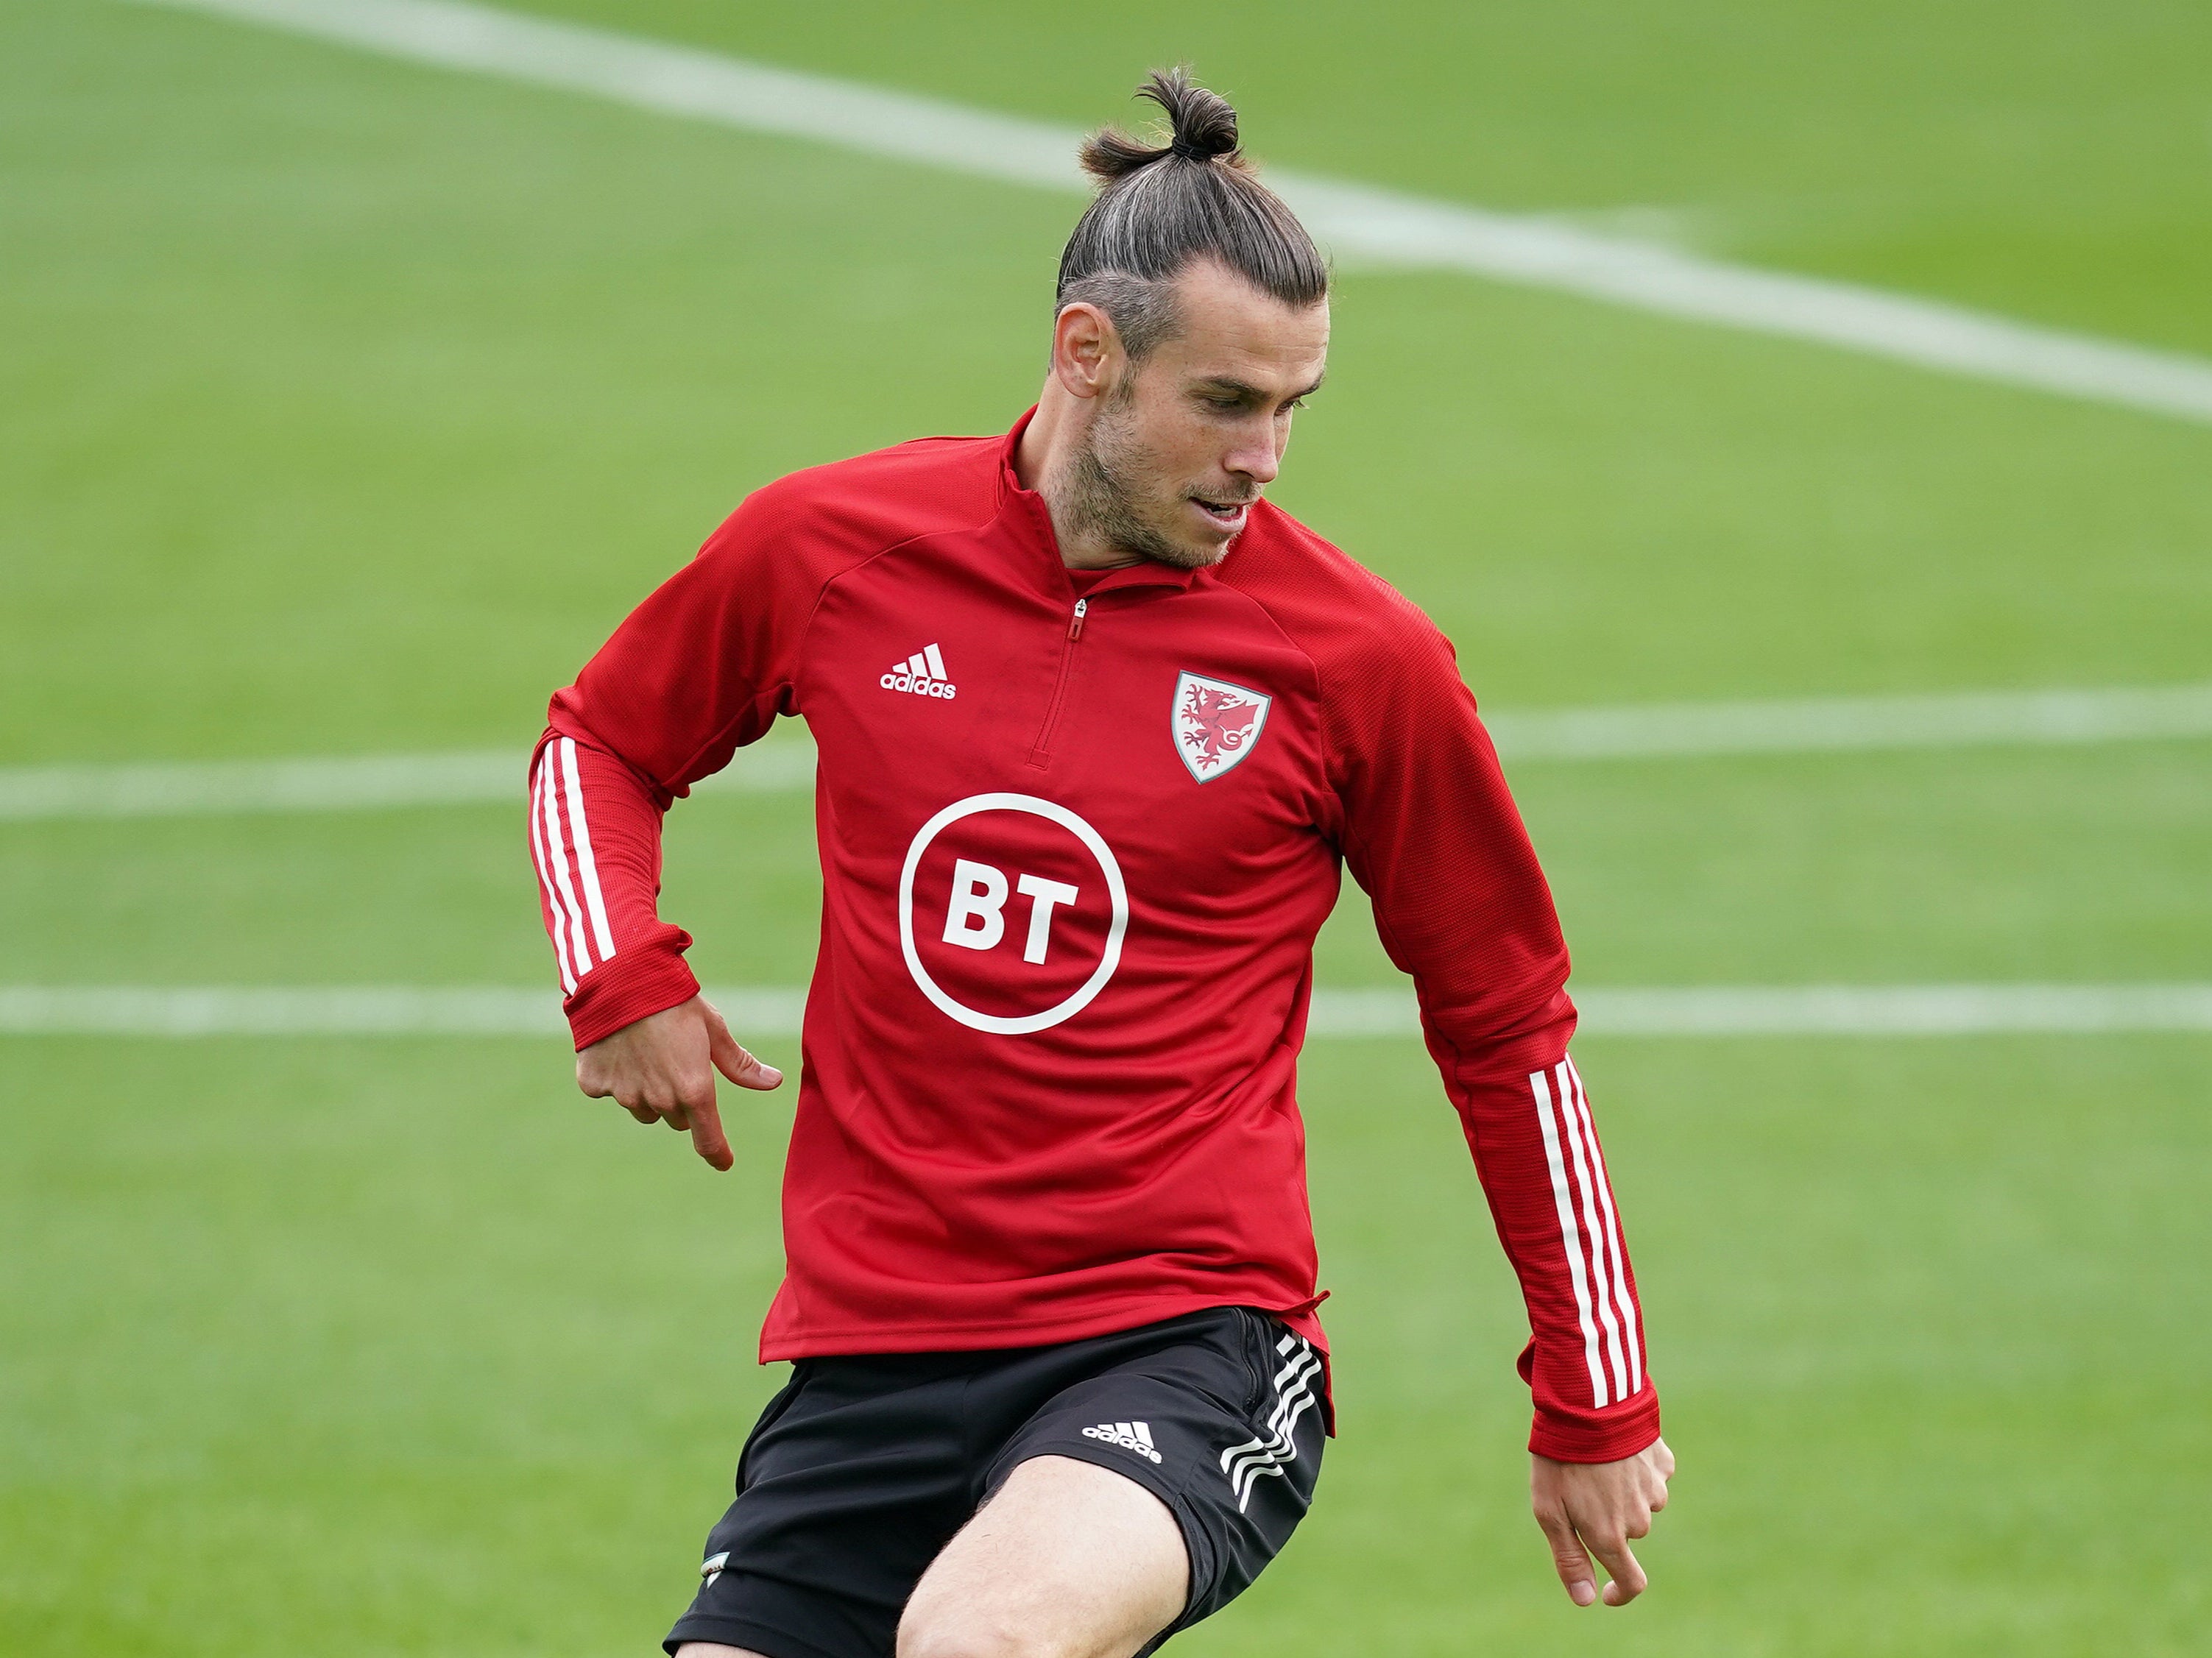 Gareth Bale was able to join Wales training ahead of the World Cup play-off tie against Austria